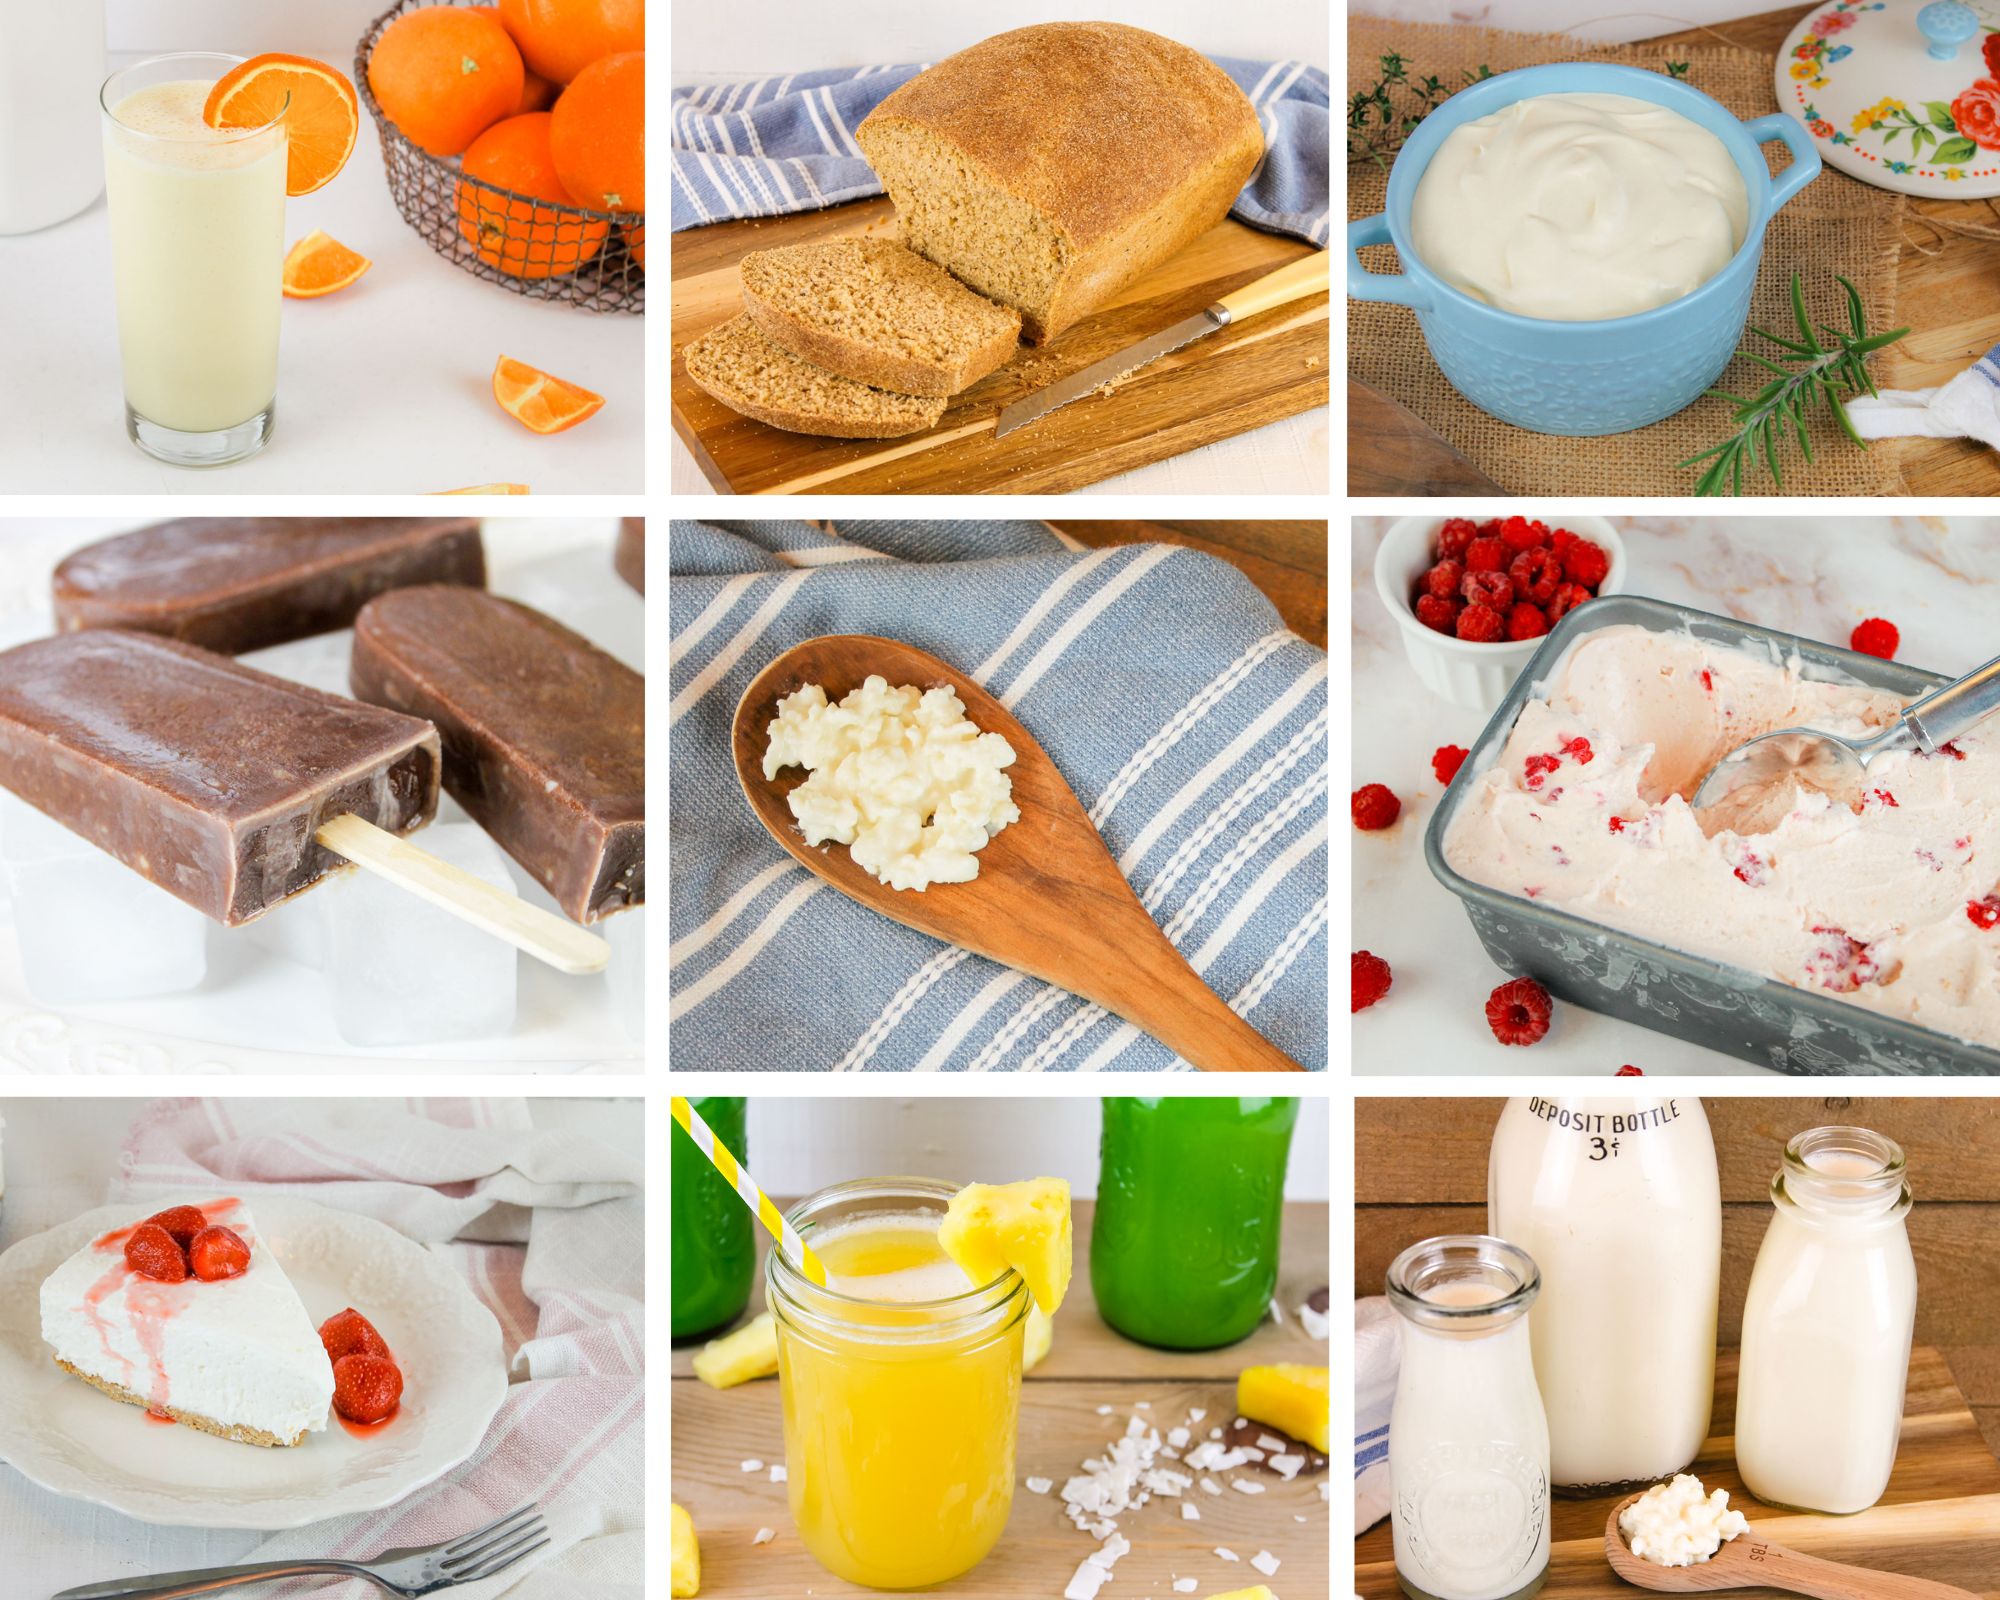 collage of milk kefir uses including milk kefir popsicles, bowl of kefir sour cream and glass or smoothie made with kefir